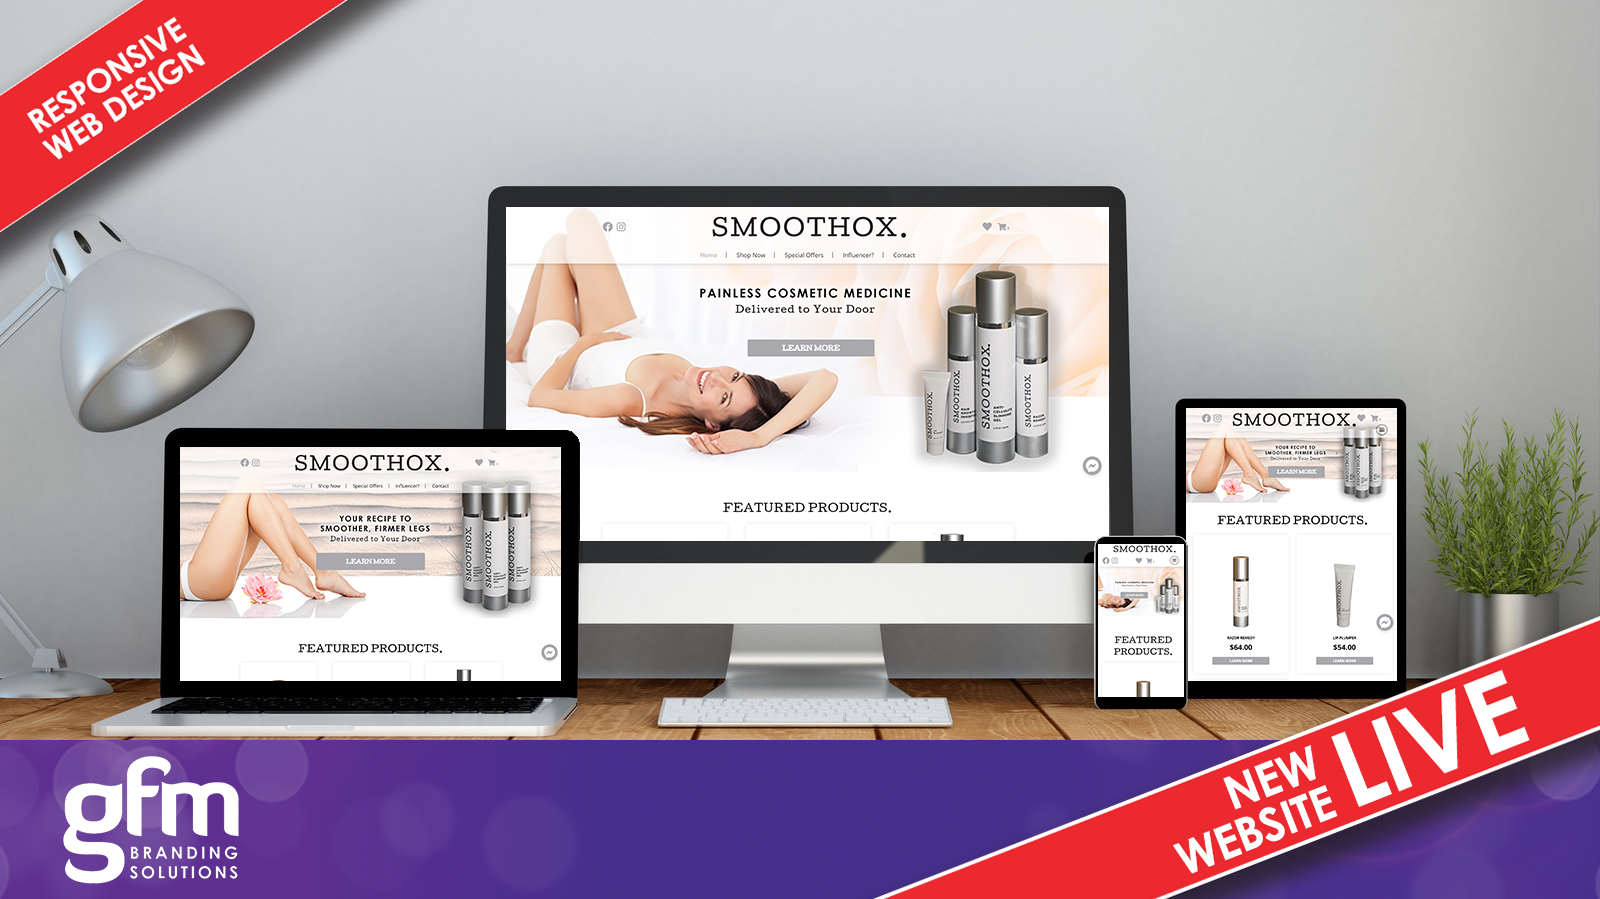 Smoothox fully responsive website design on multiple screens